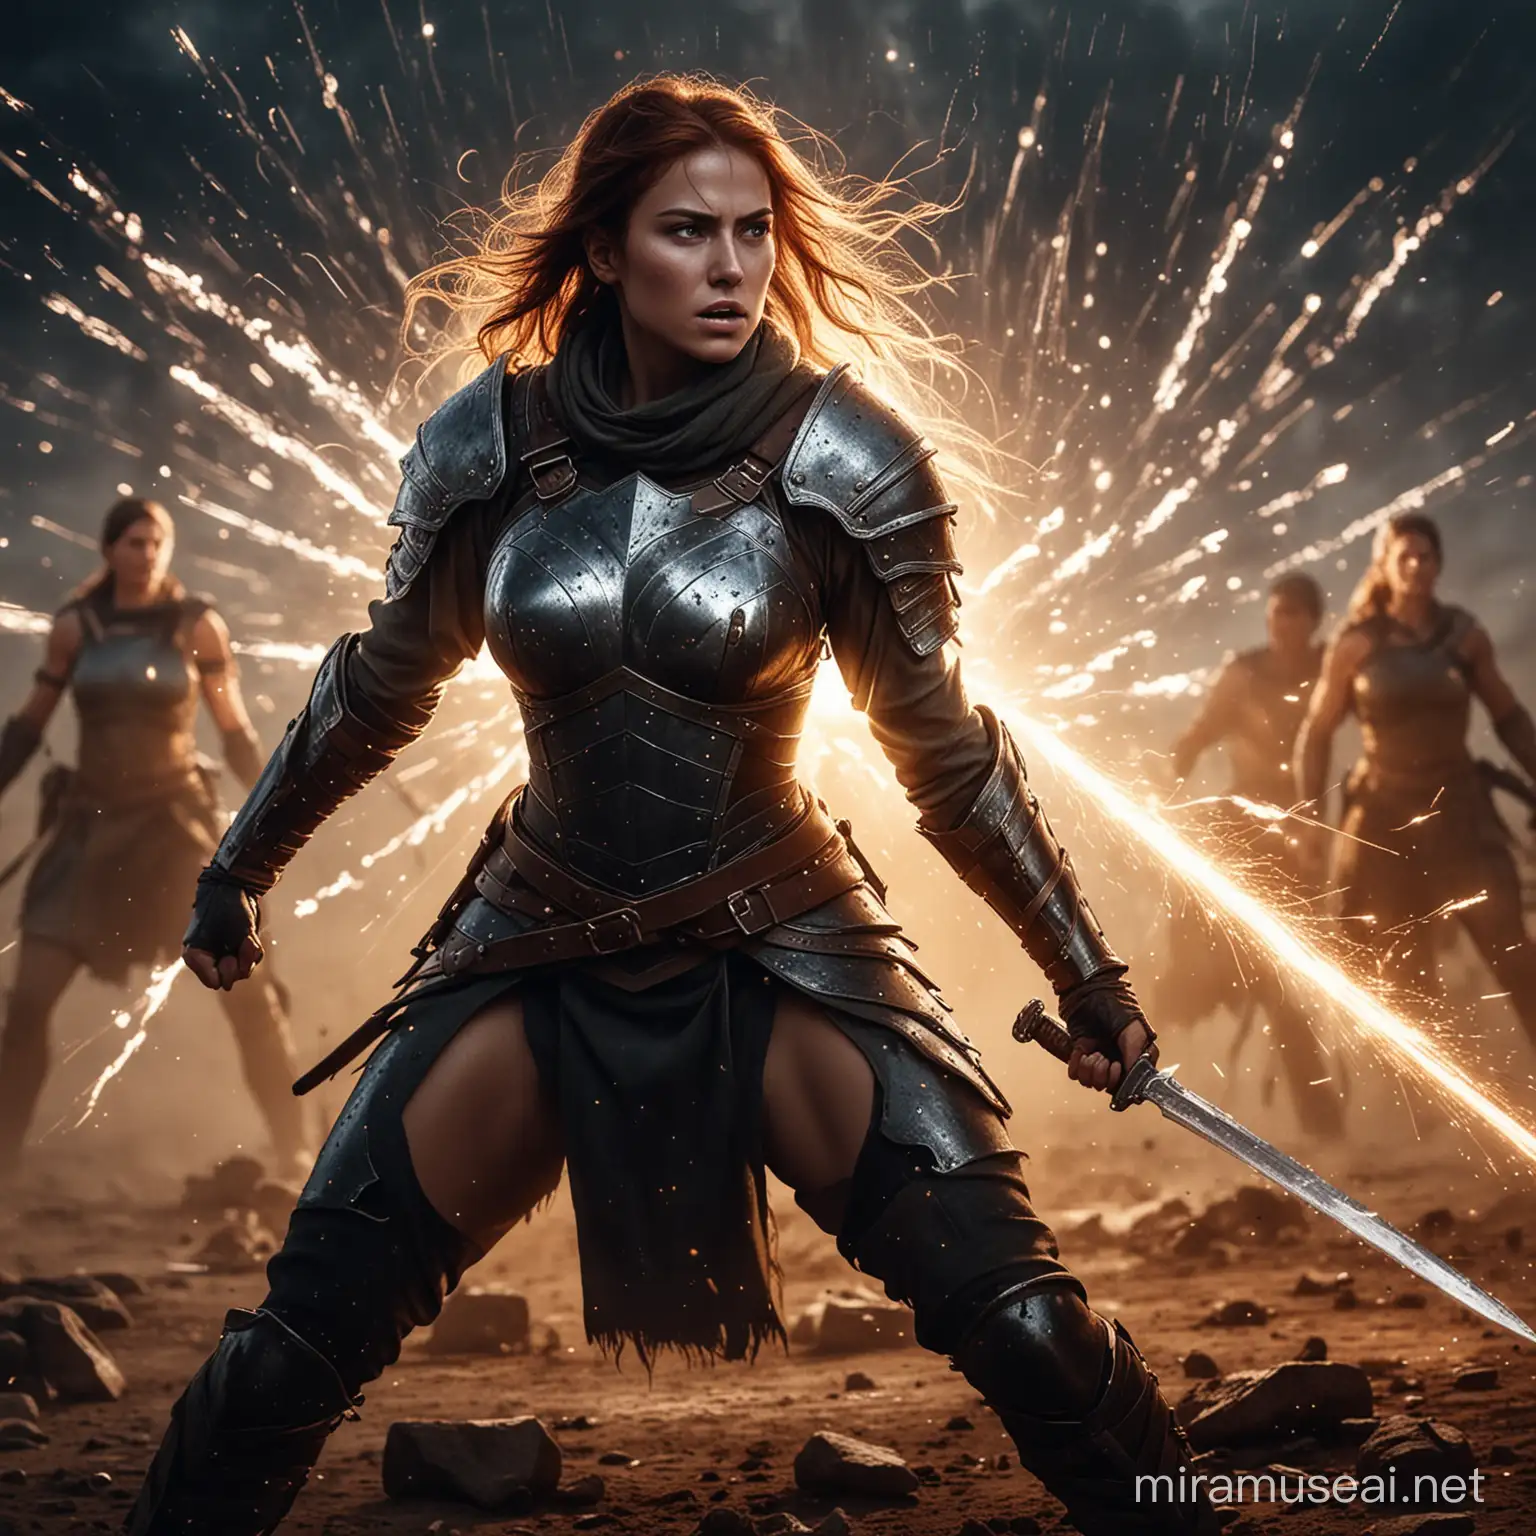 Courageous Woman Amidst Battle with Glowing Sparks and Warriors